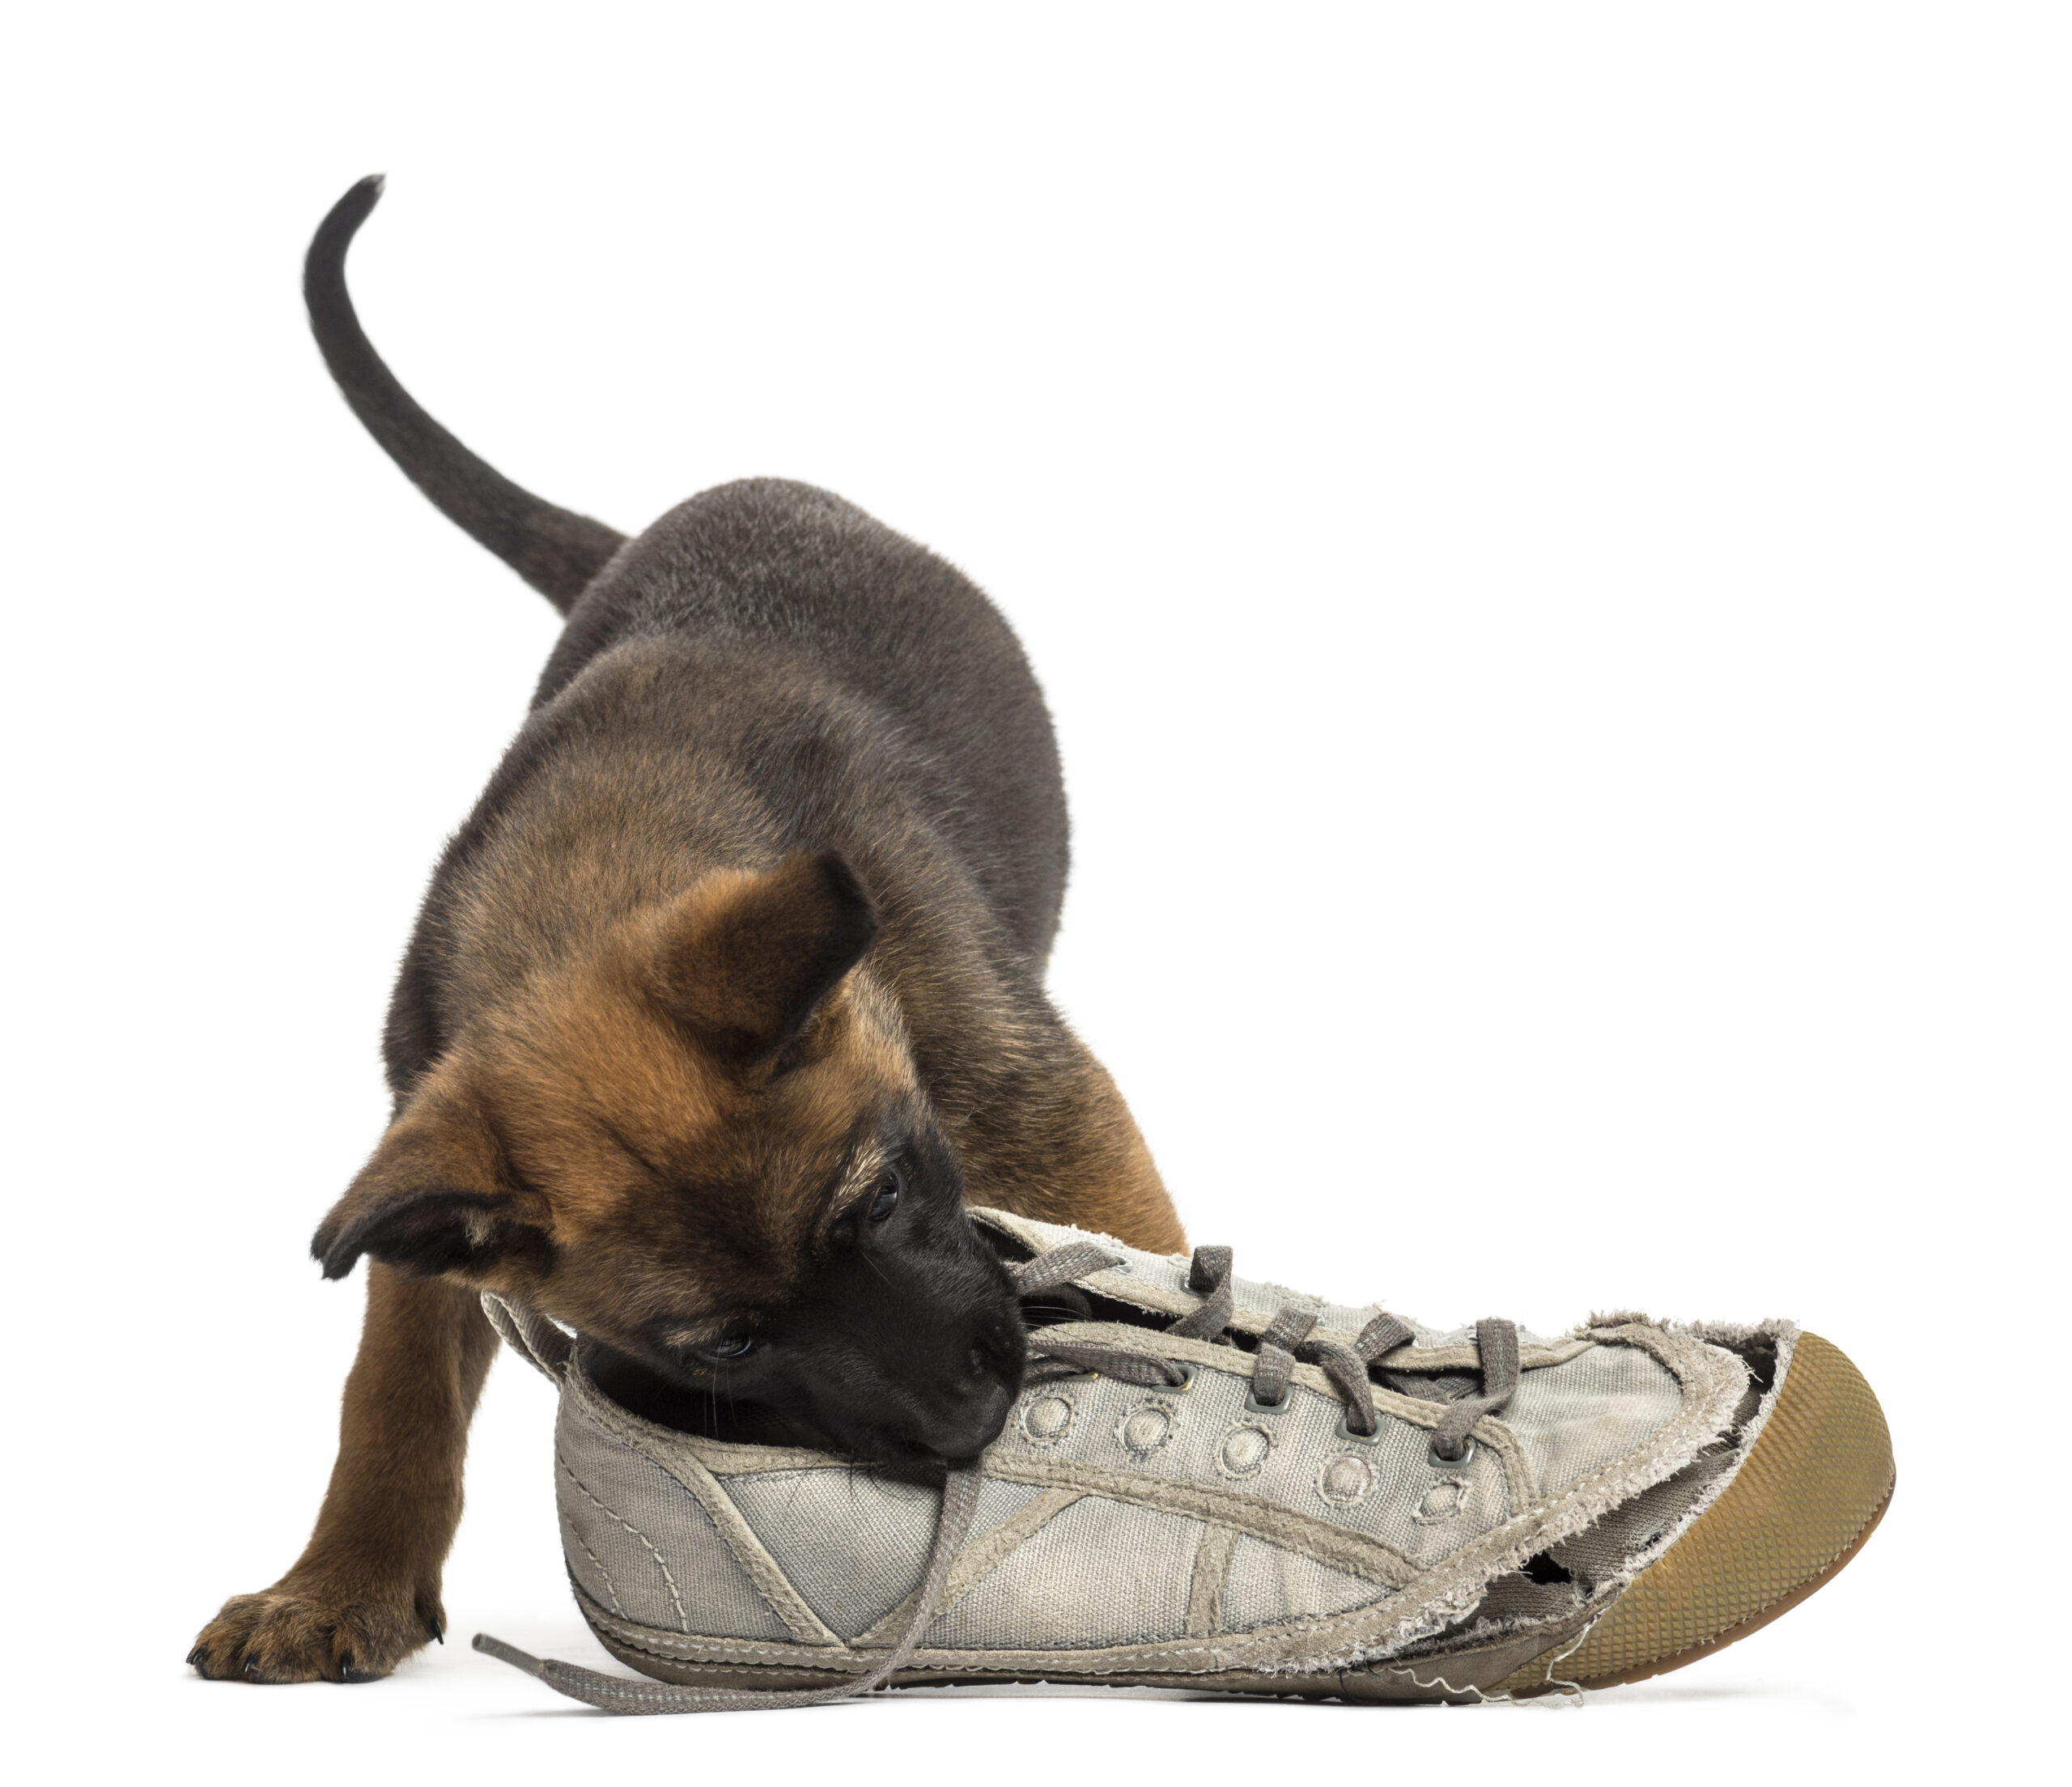 Malinois puppy chewing a shoe